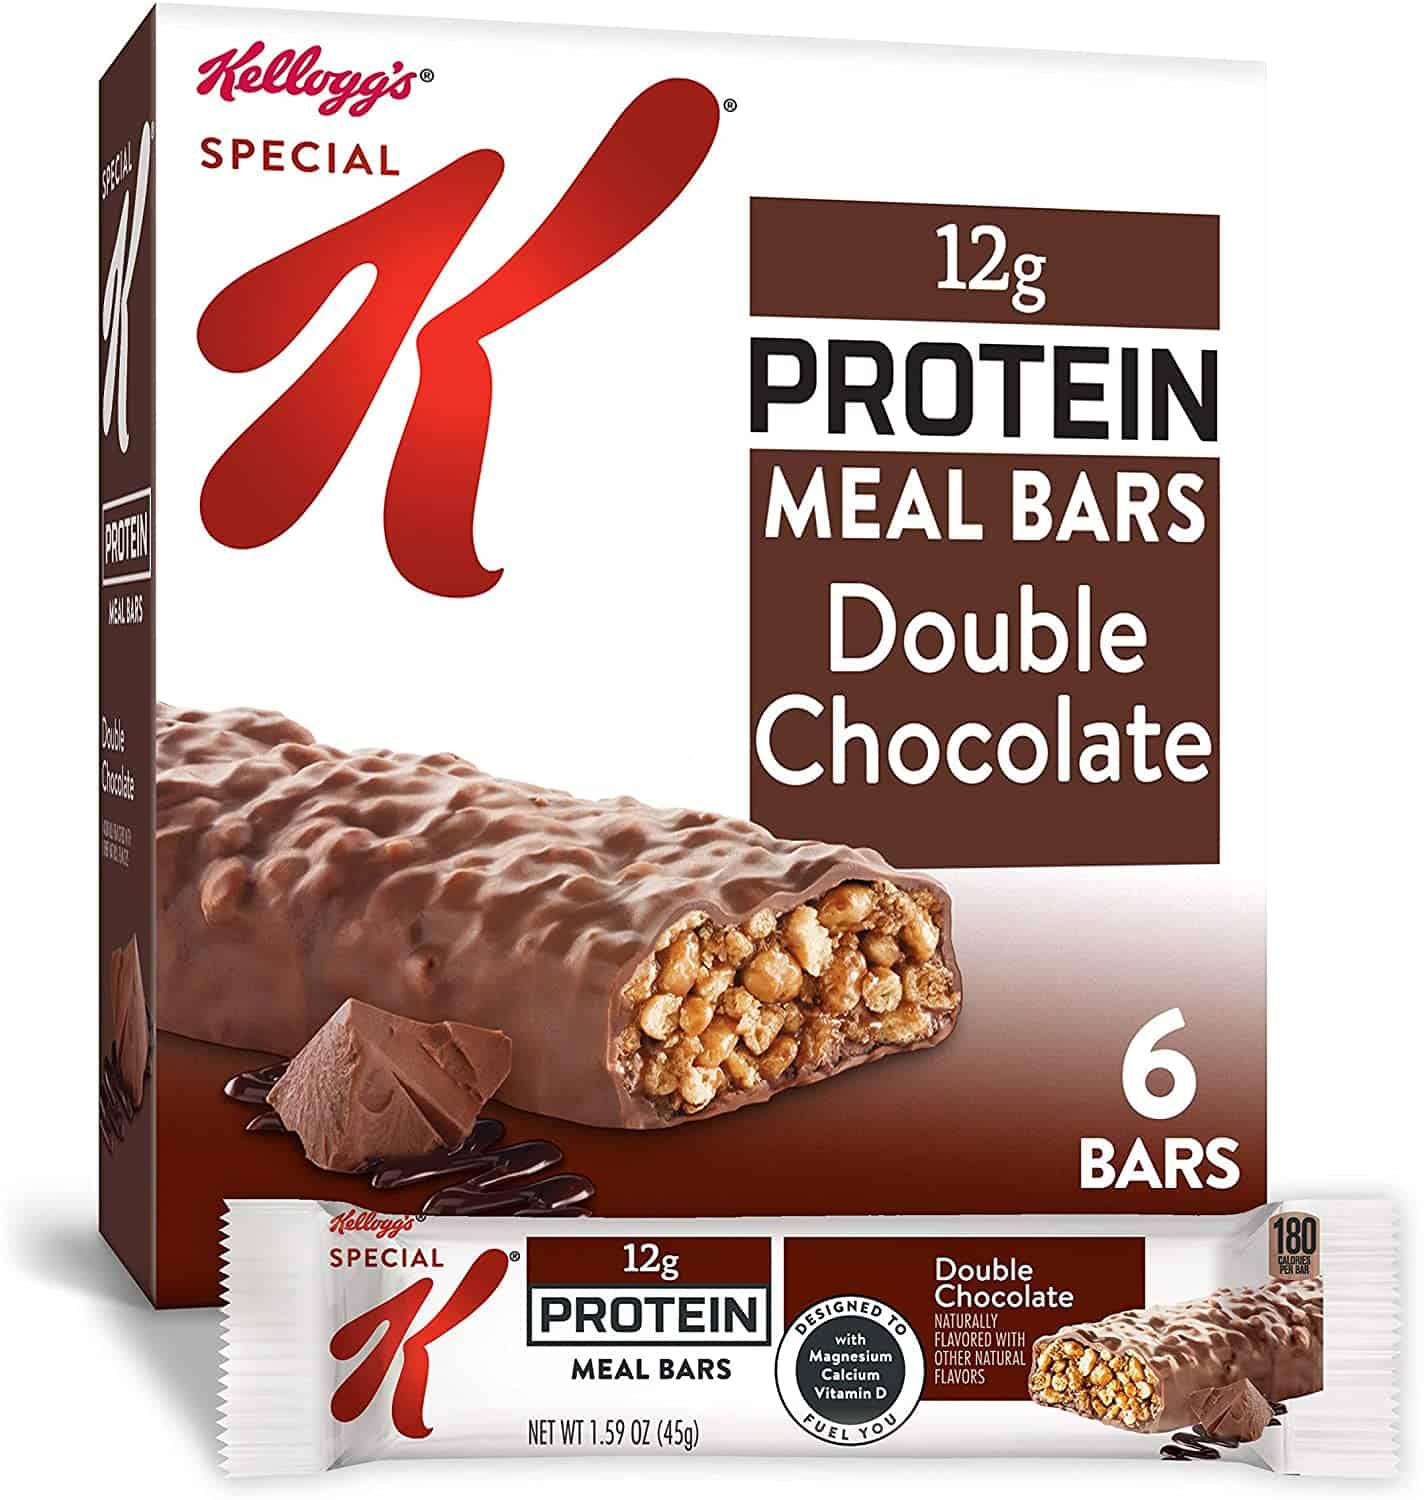 special-k-protein-meal-bars-only-5-98-shipped-at-amazon-new-coupons